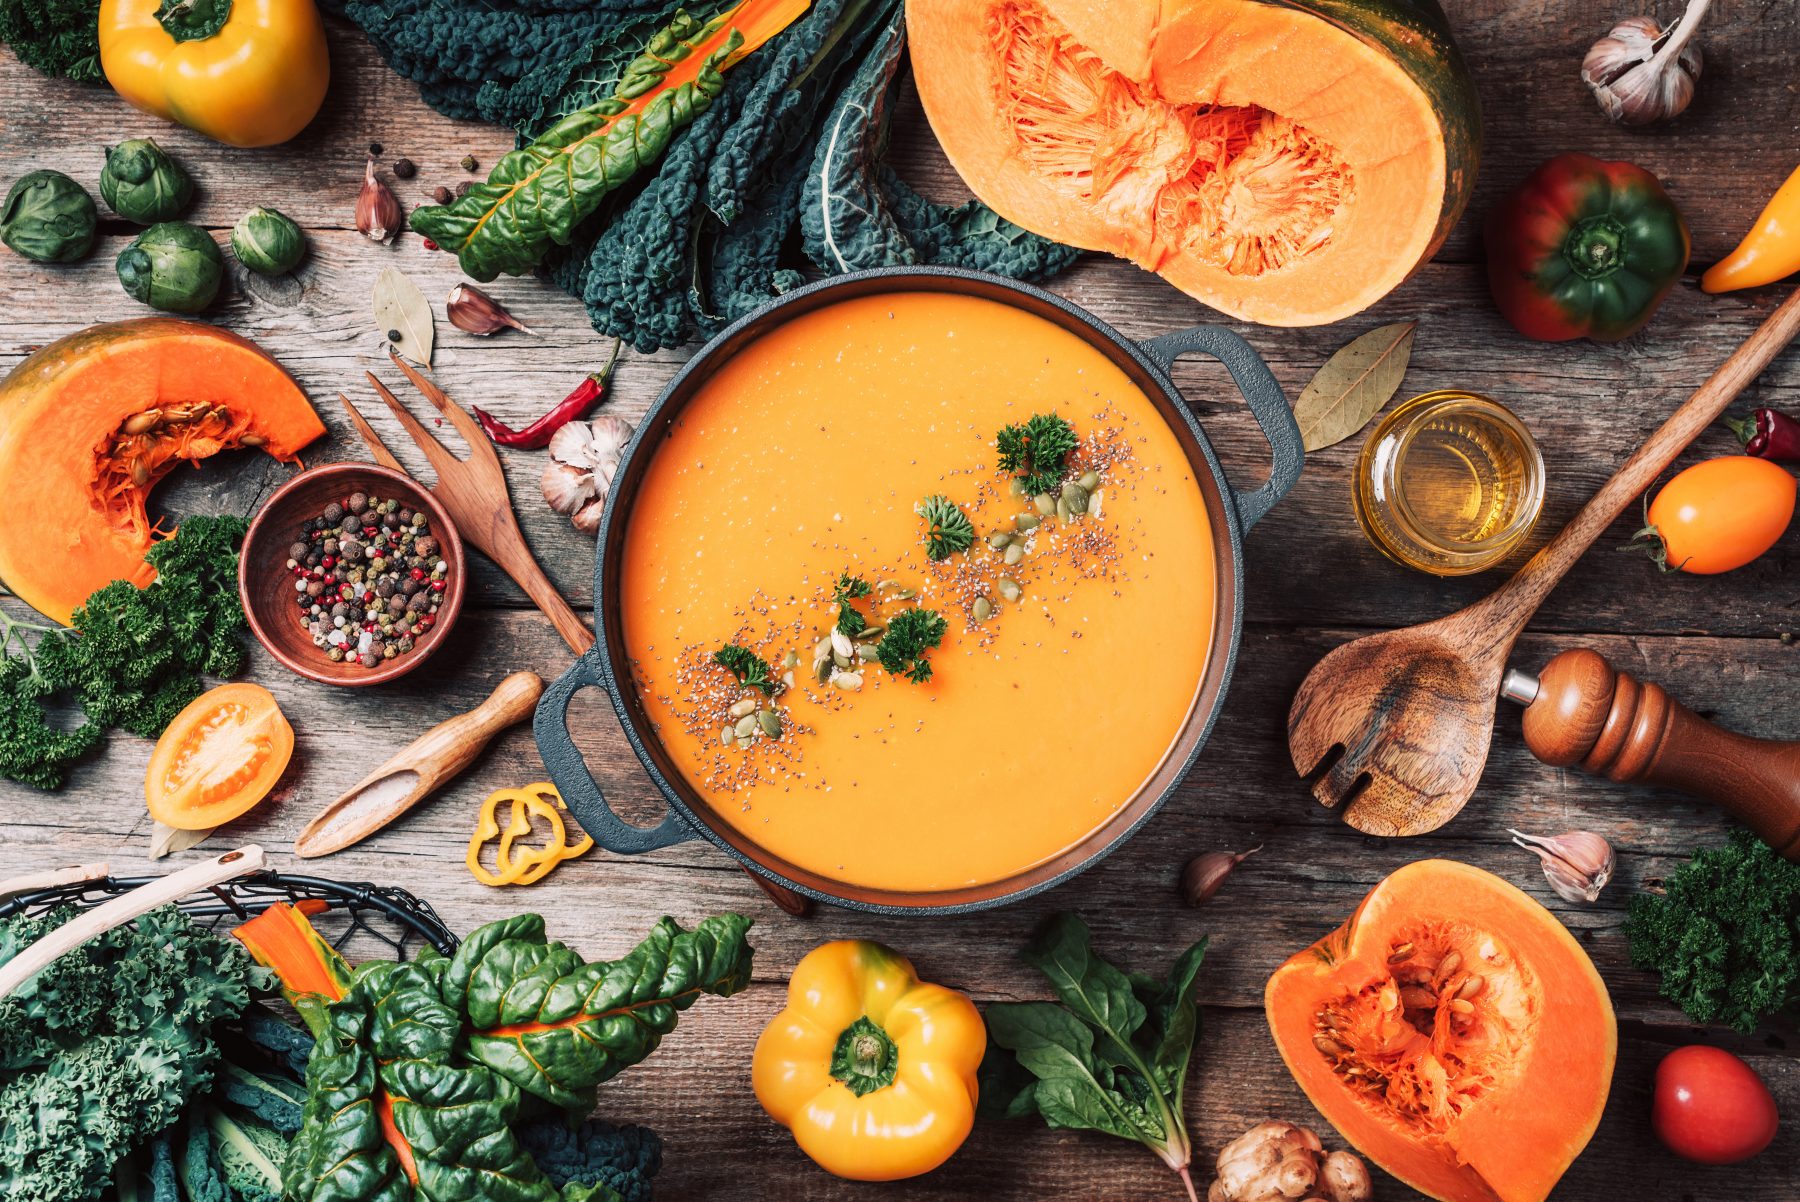 Pumpkin soup and other healthy fall foods and vegetables arranged together